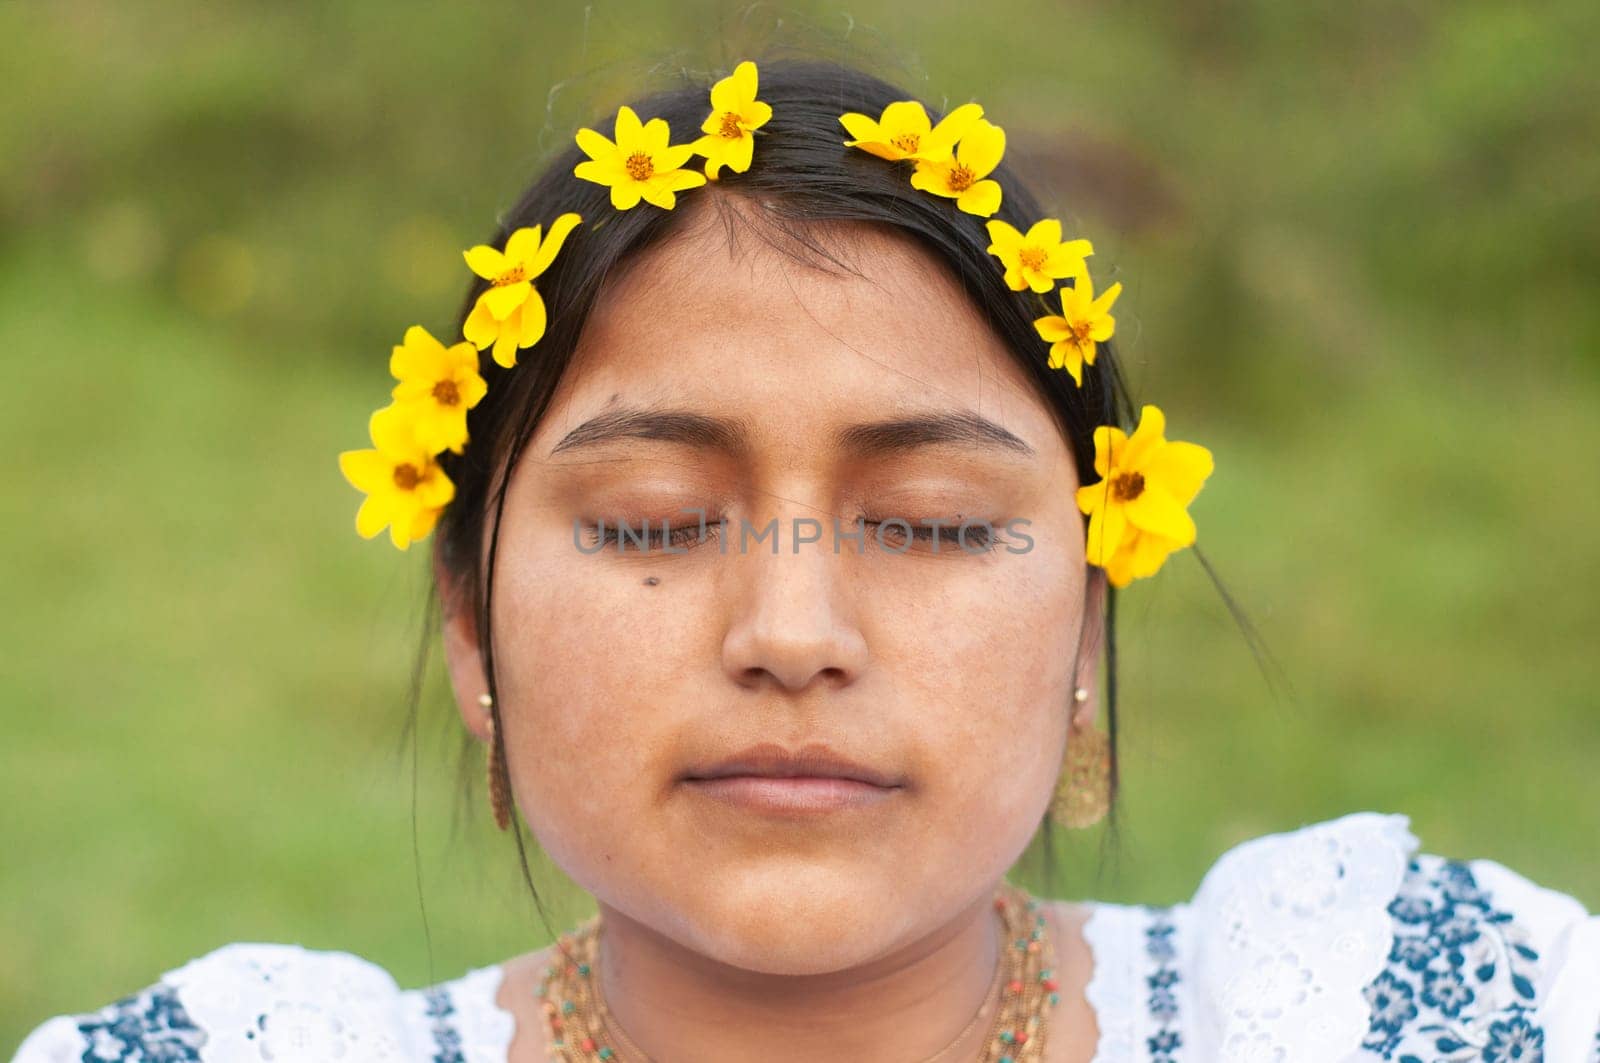 A young woman with closed eyes appears peaceful, adorned with a yellow flower headband, wearing traditional Ecuadorian clothing, embodying a moment of tranquility.